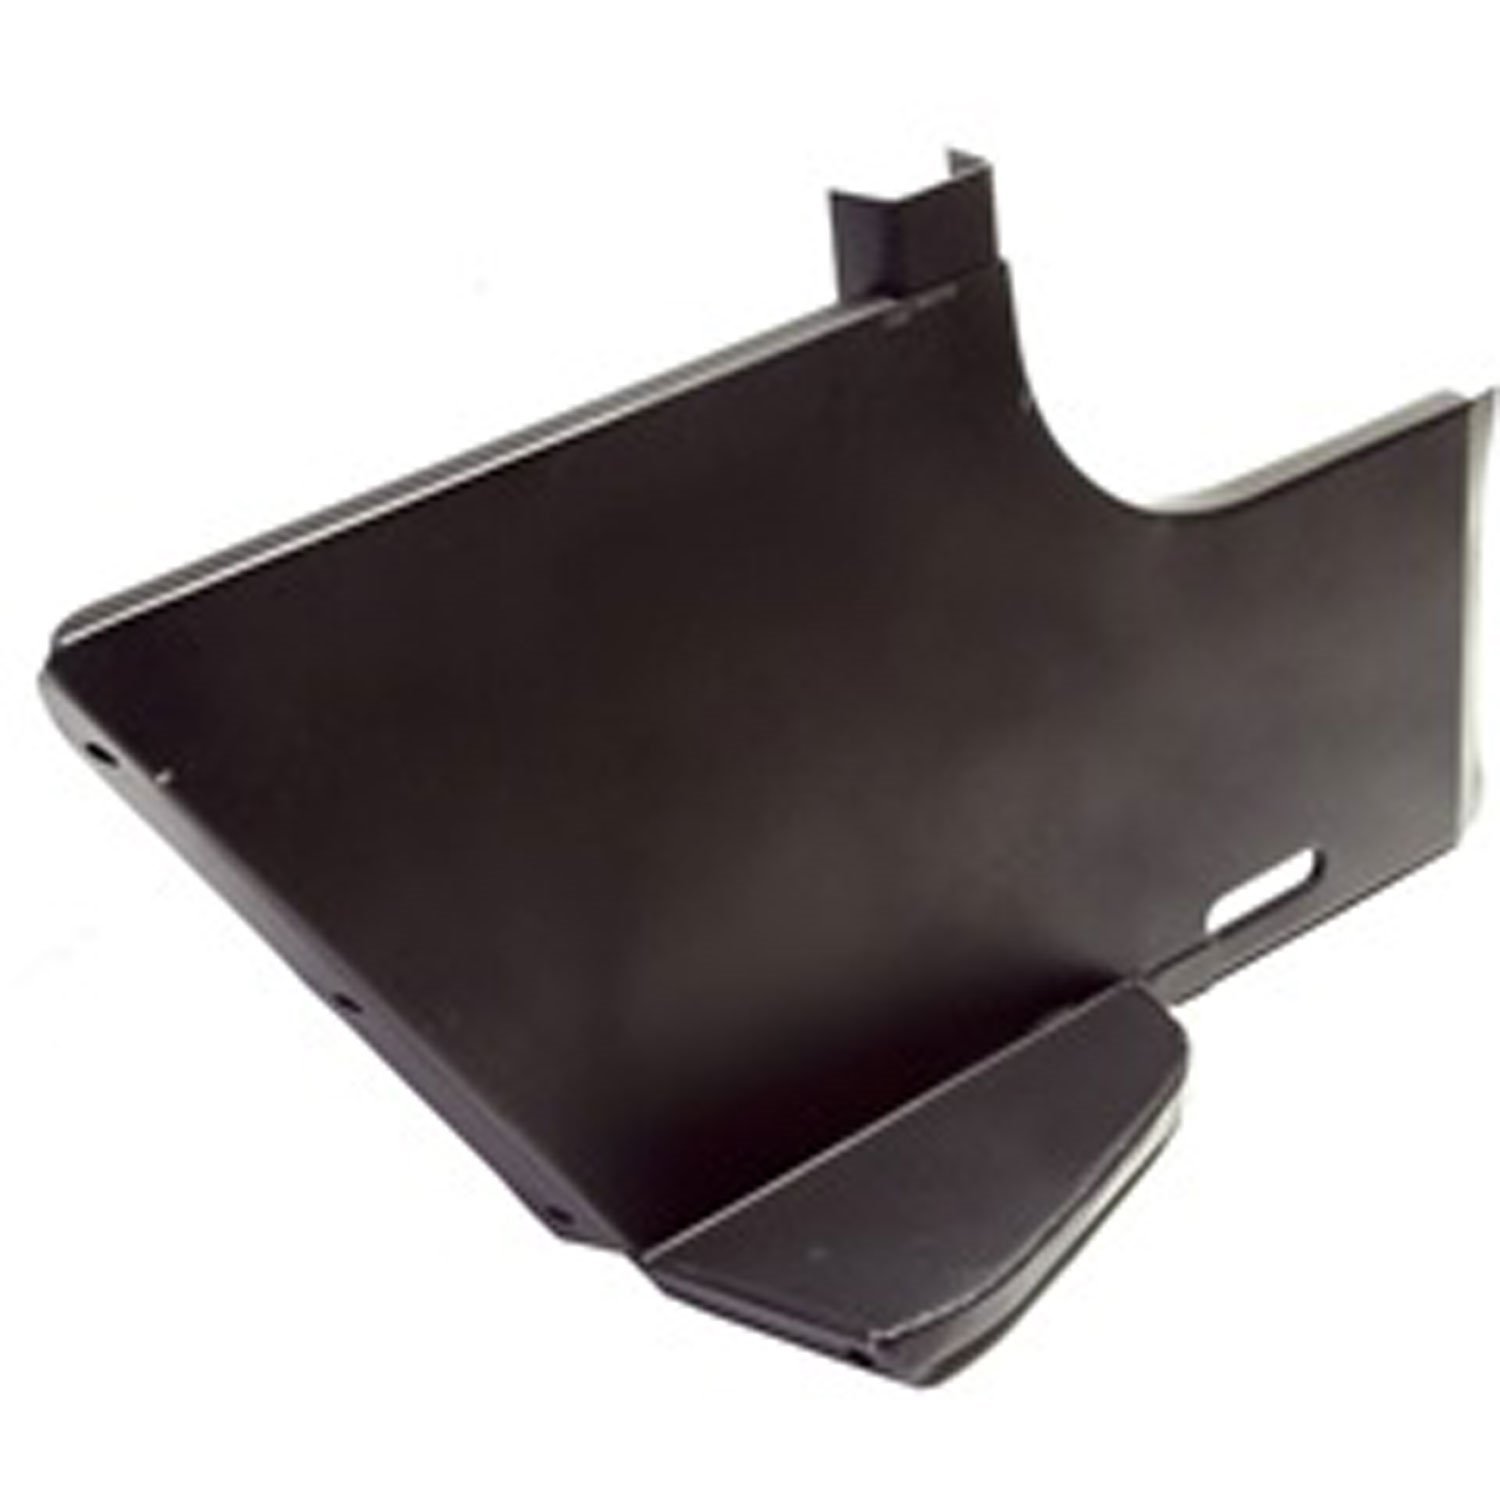 This left cowl side panel from Omix-ADA fits 46-53 Willys CJ2A and CJ3A and includes the step.